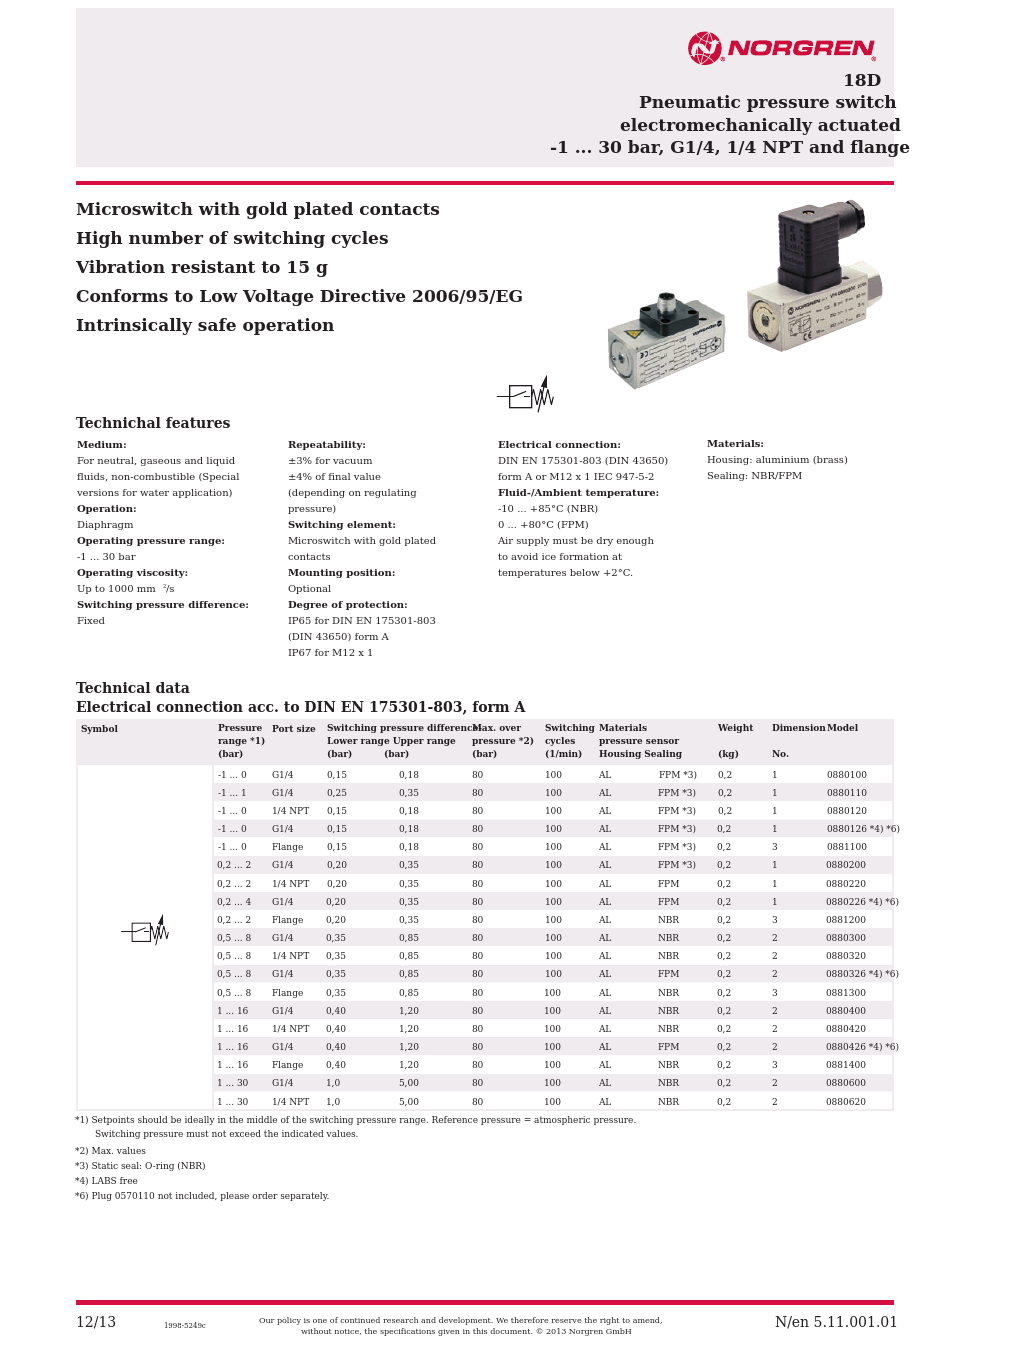 18D Pressure Switch Datasheets